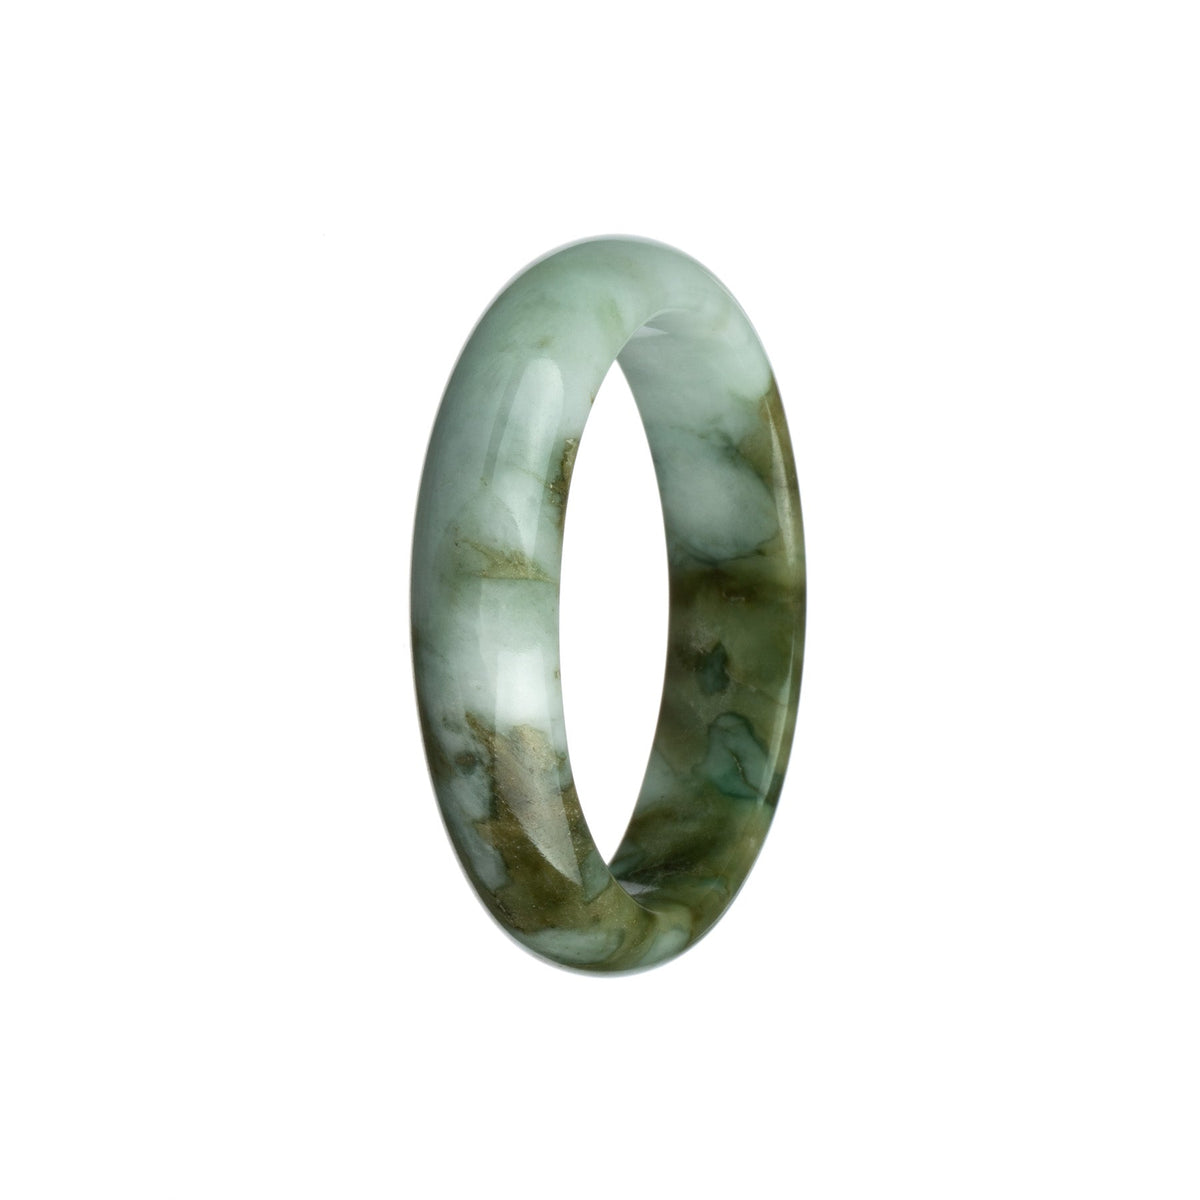 A close-up photo of an olive green and white jadeite bangle, featuring a half-moon shape and measuring 55mm in size. The bangle has a smooth and polished surface, showcasing the natural beauty of the jadeite.